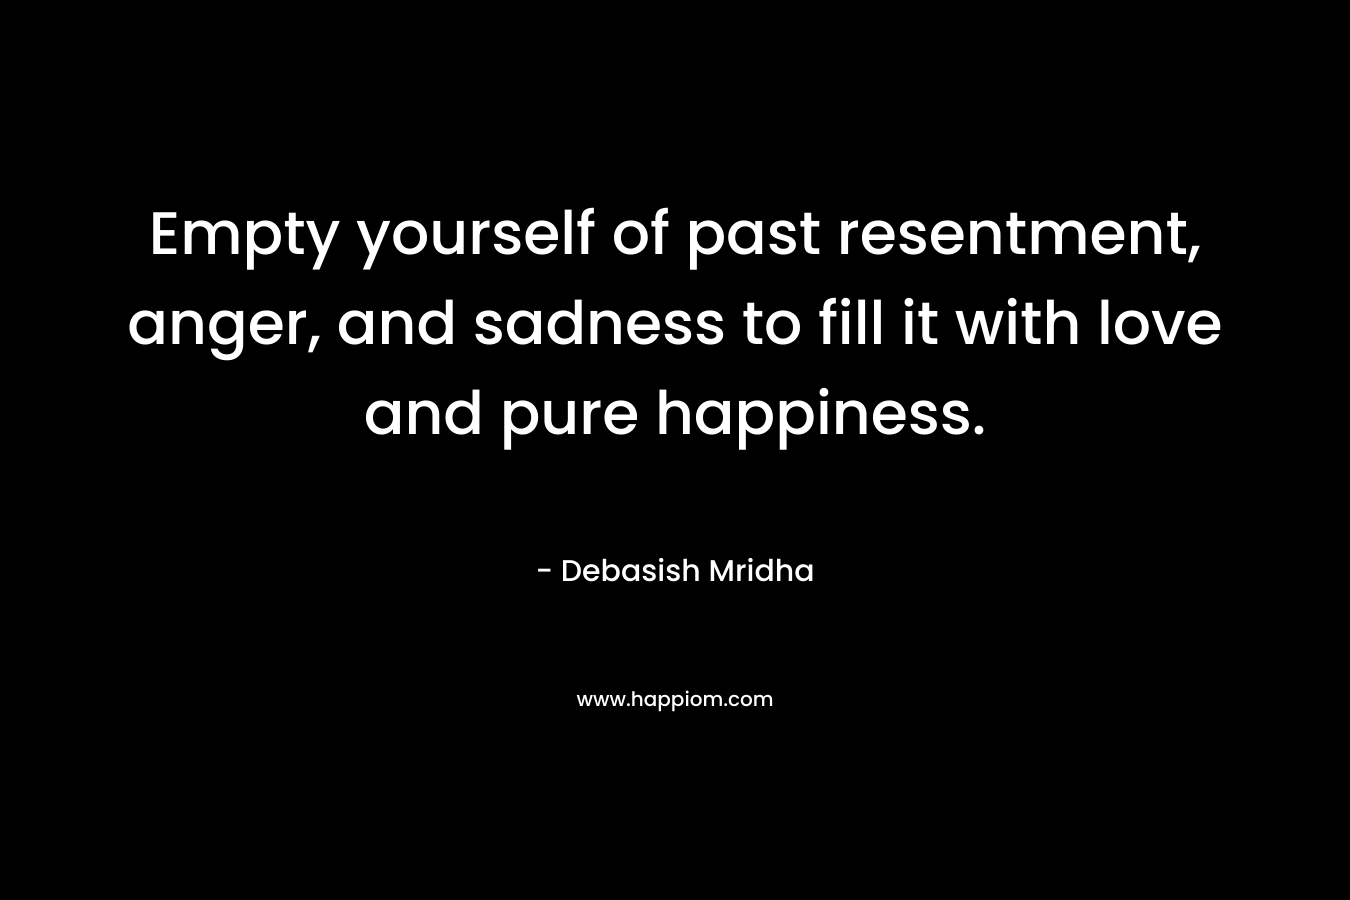 Empty yourself of past resentment, anger, and sadness to fill it with love and pure happiness.